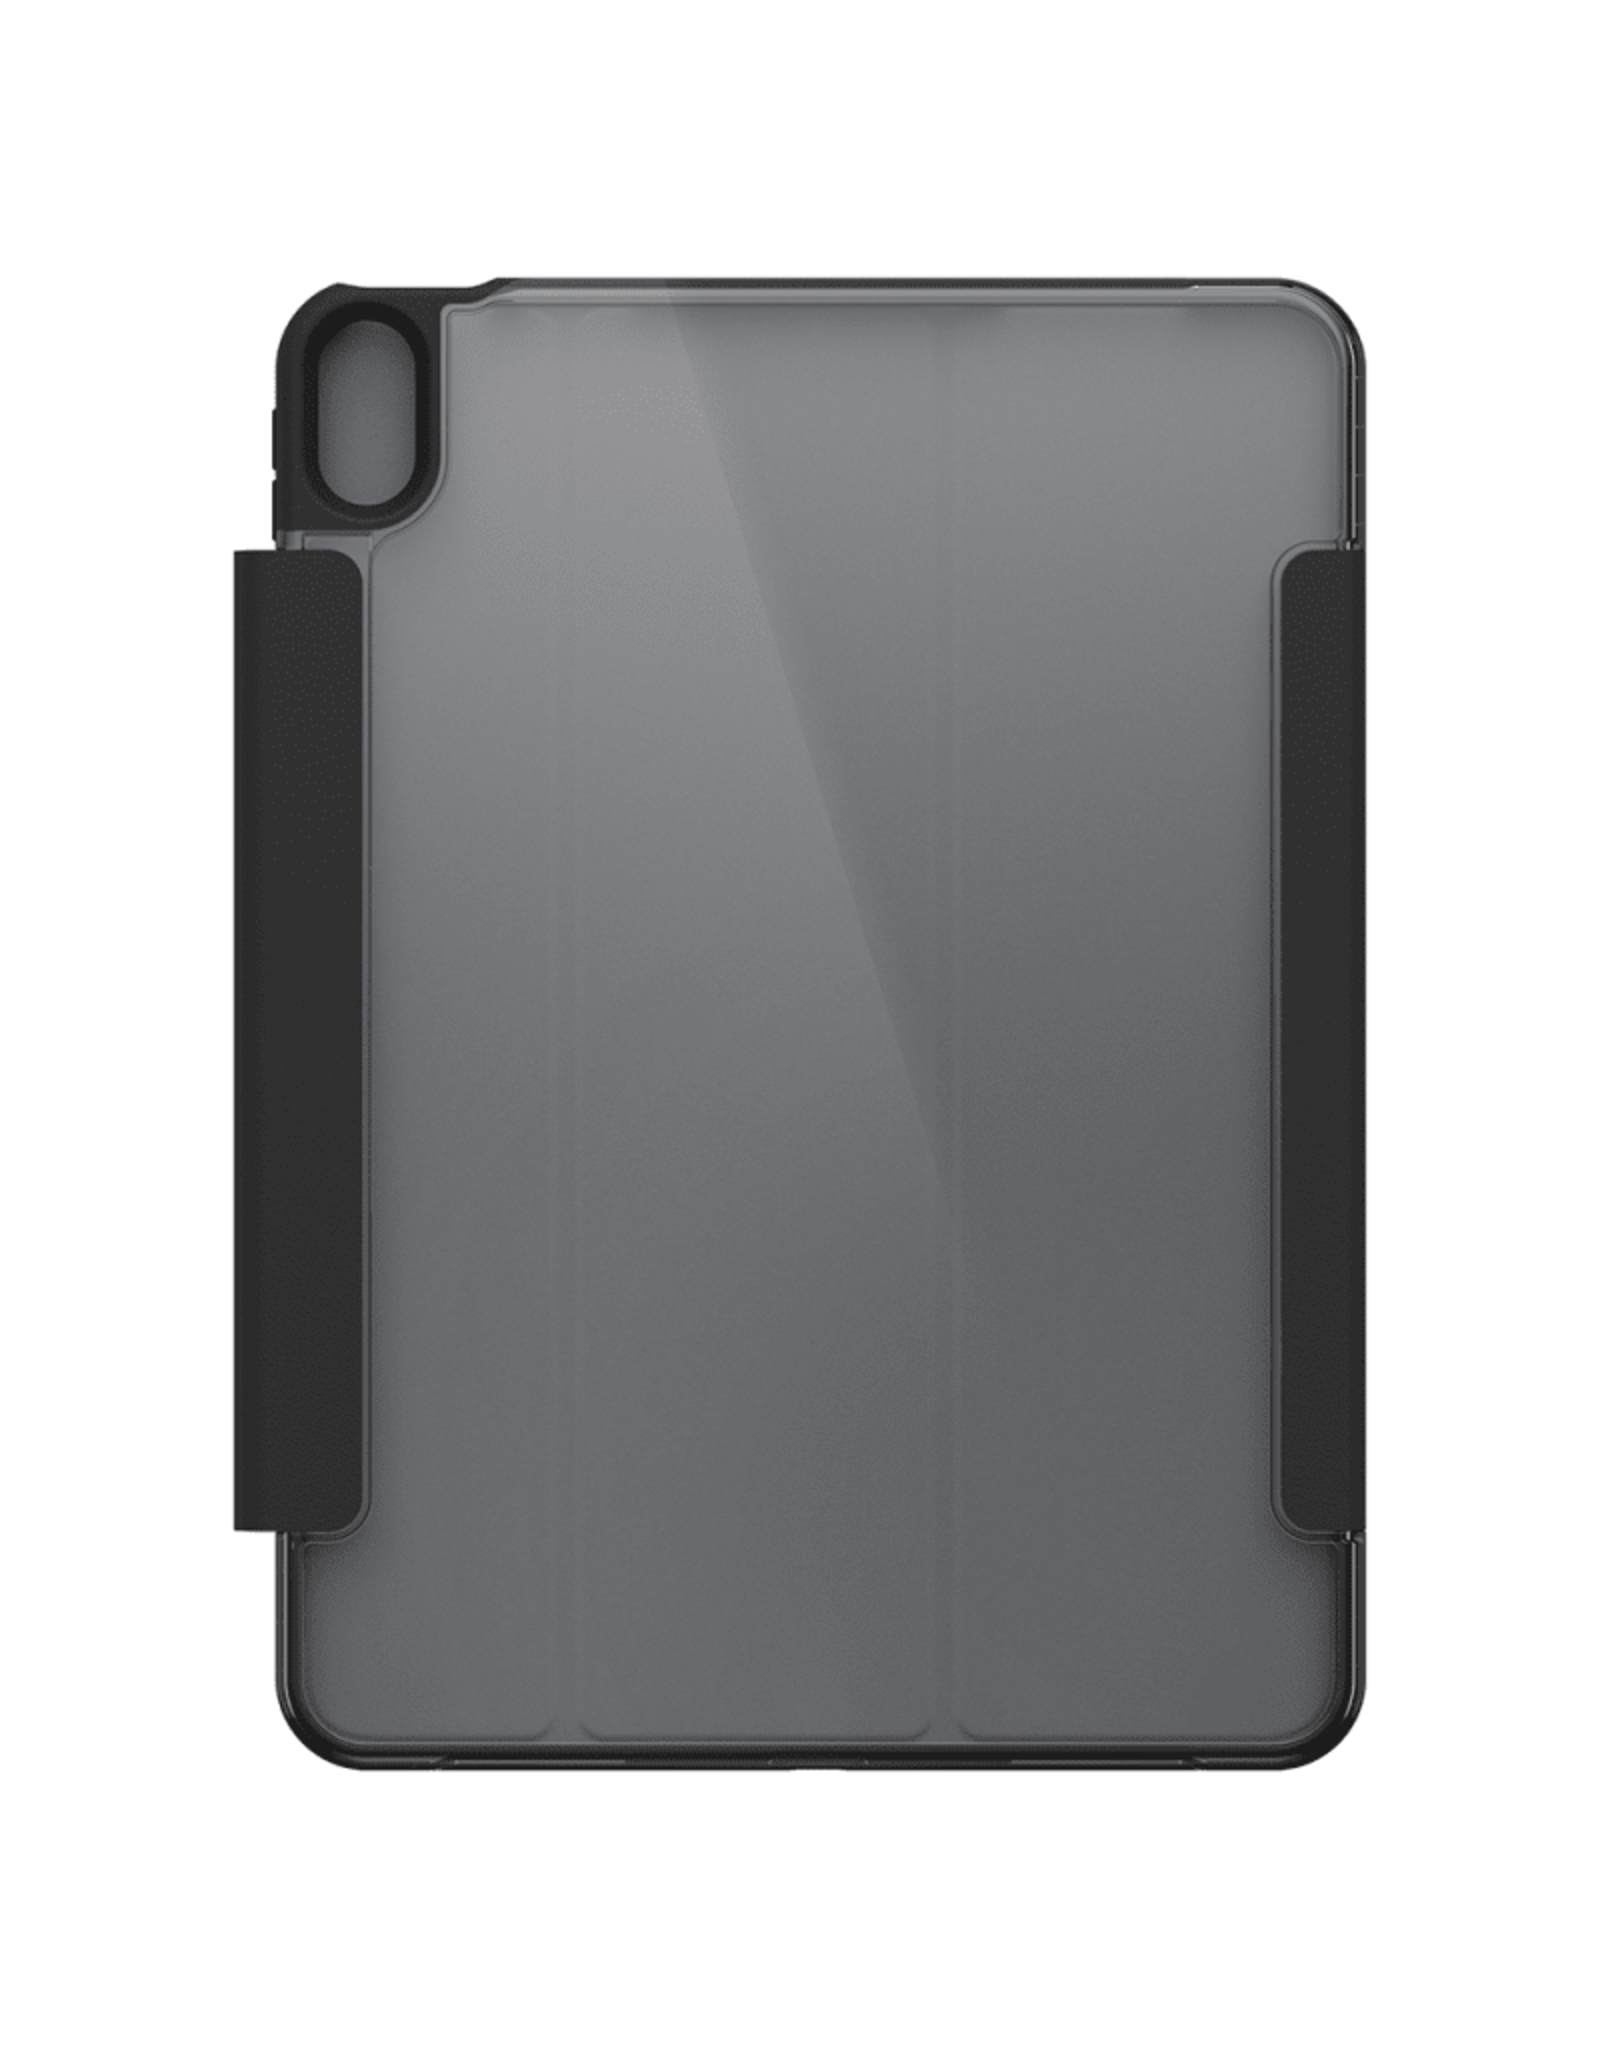 Otterbox OtterBox Symmetry 360 Series Case suits iPad Air 10.9" 4th Gen (2020)